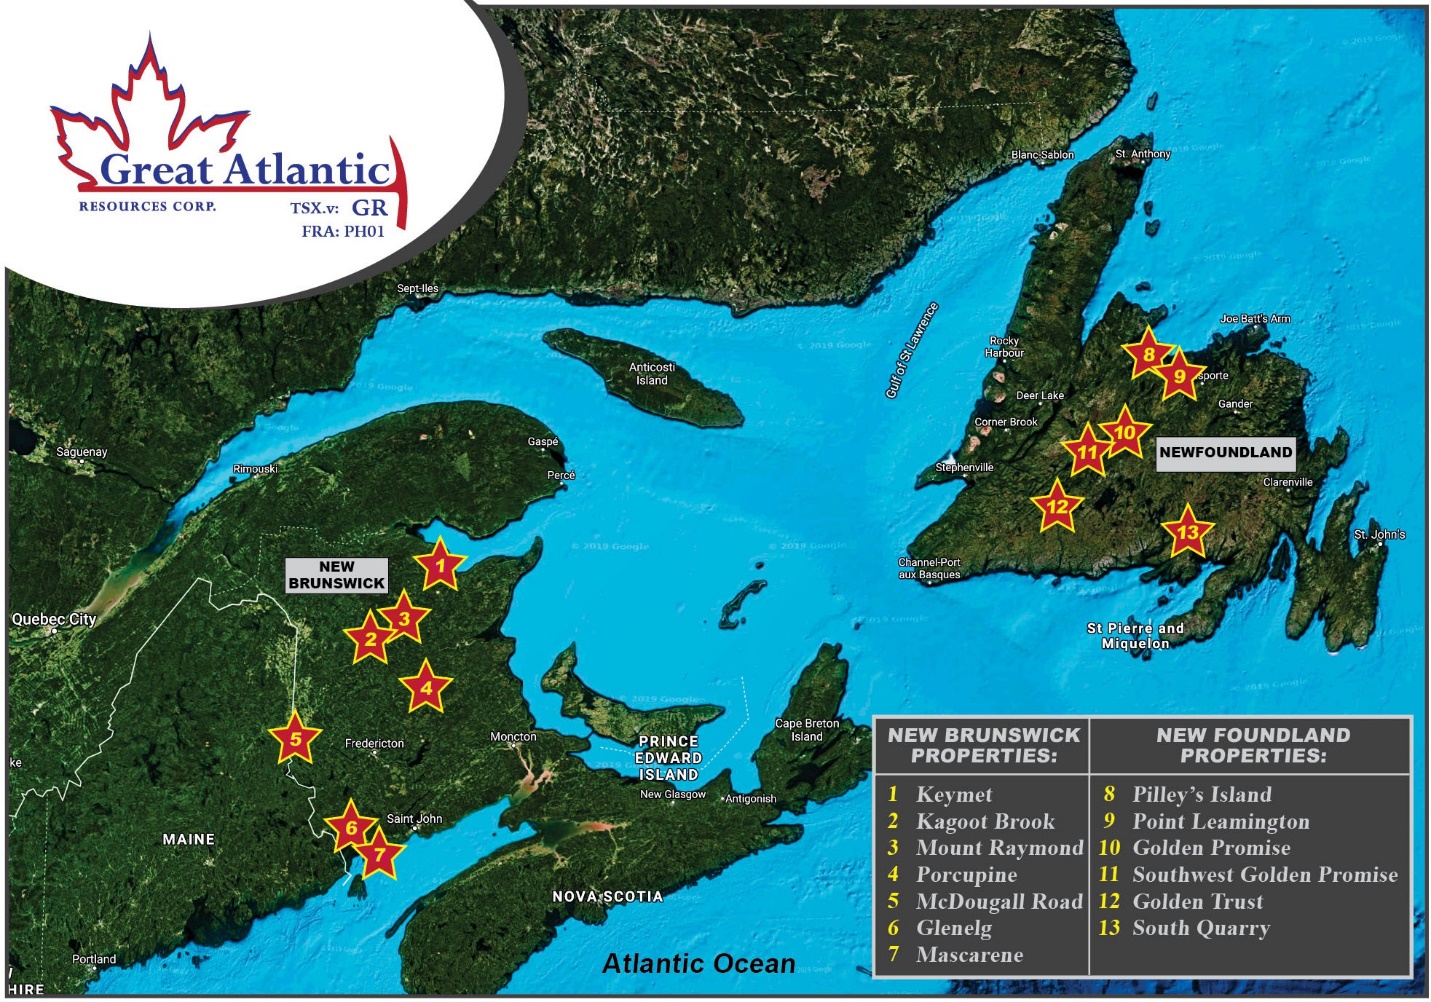 Great Atlantic Resources Corp., Wednesday, February 26, 2020, Press release picture